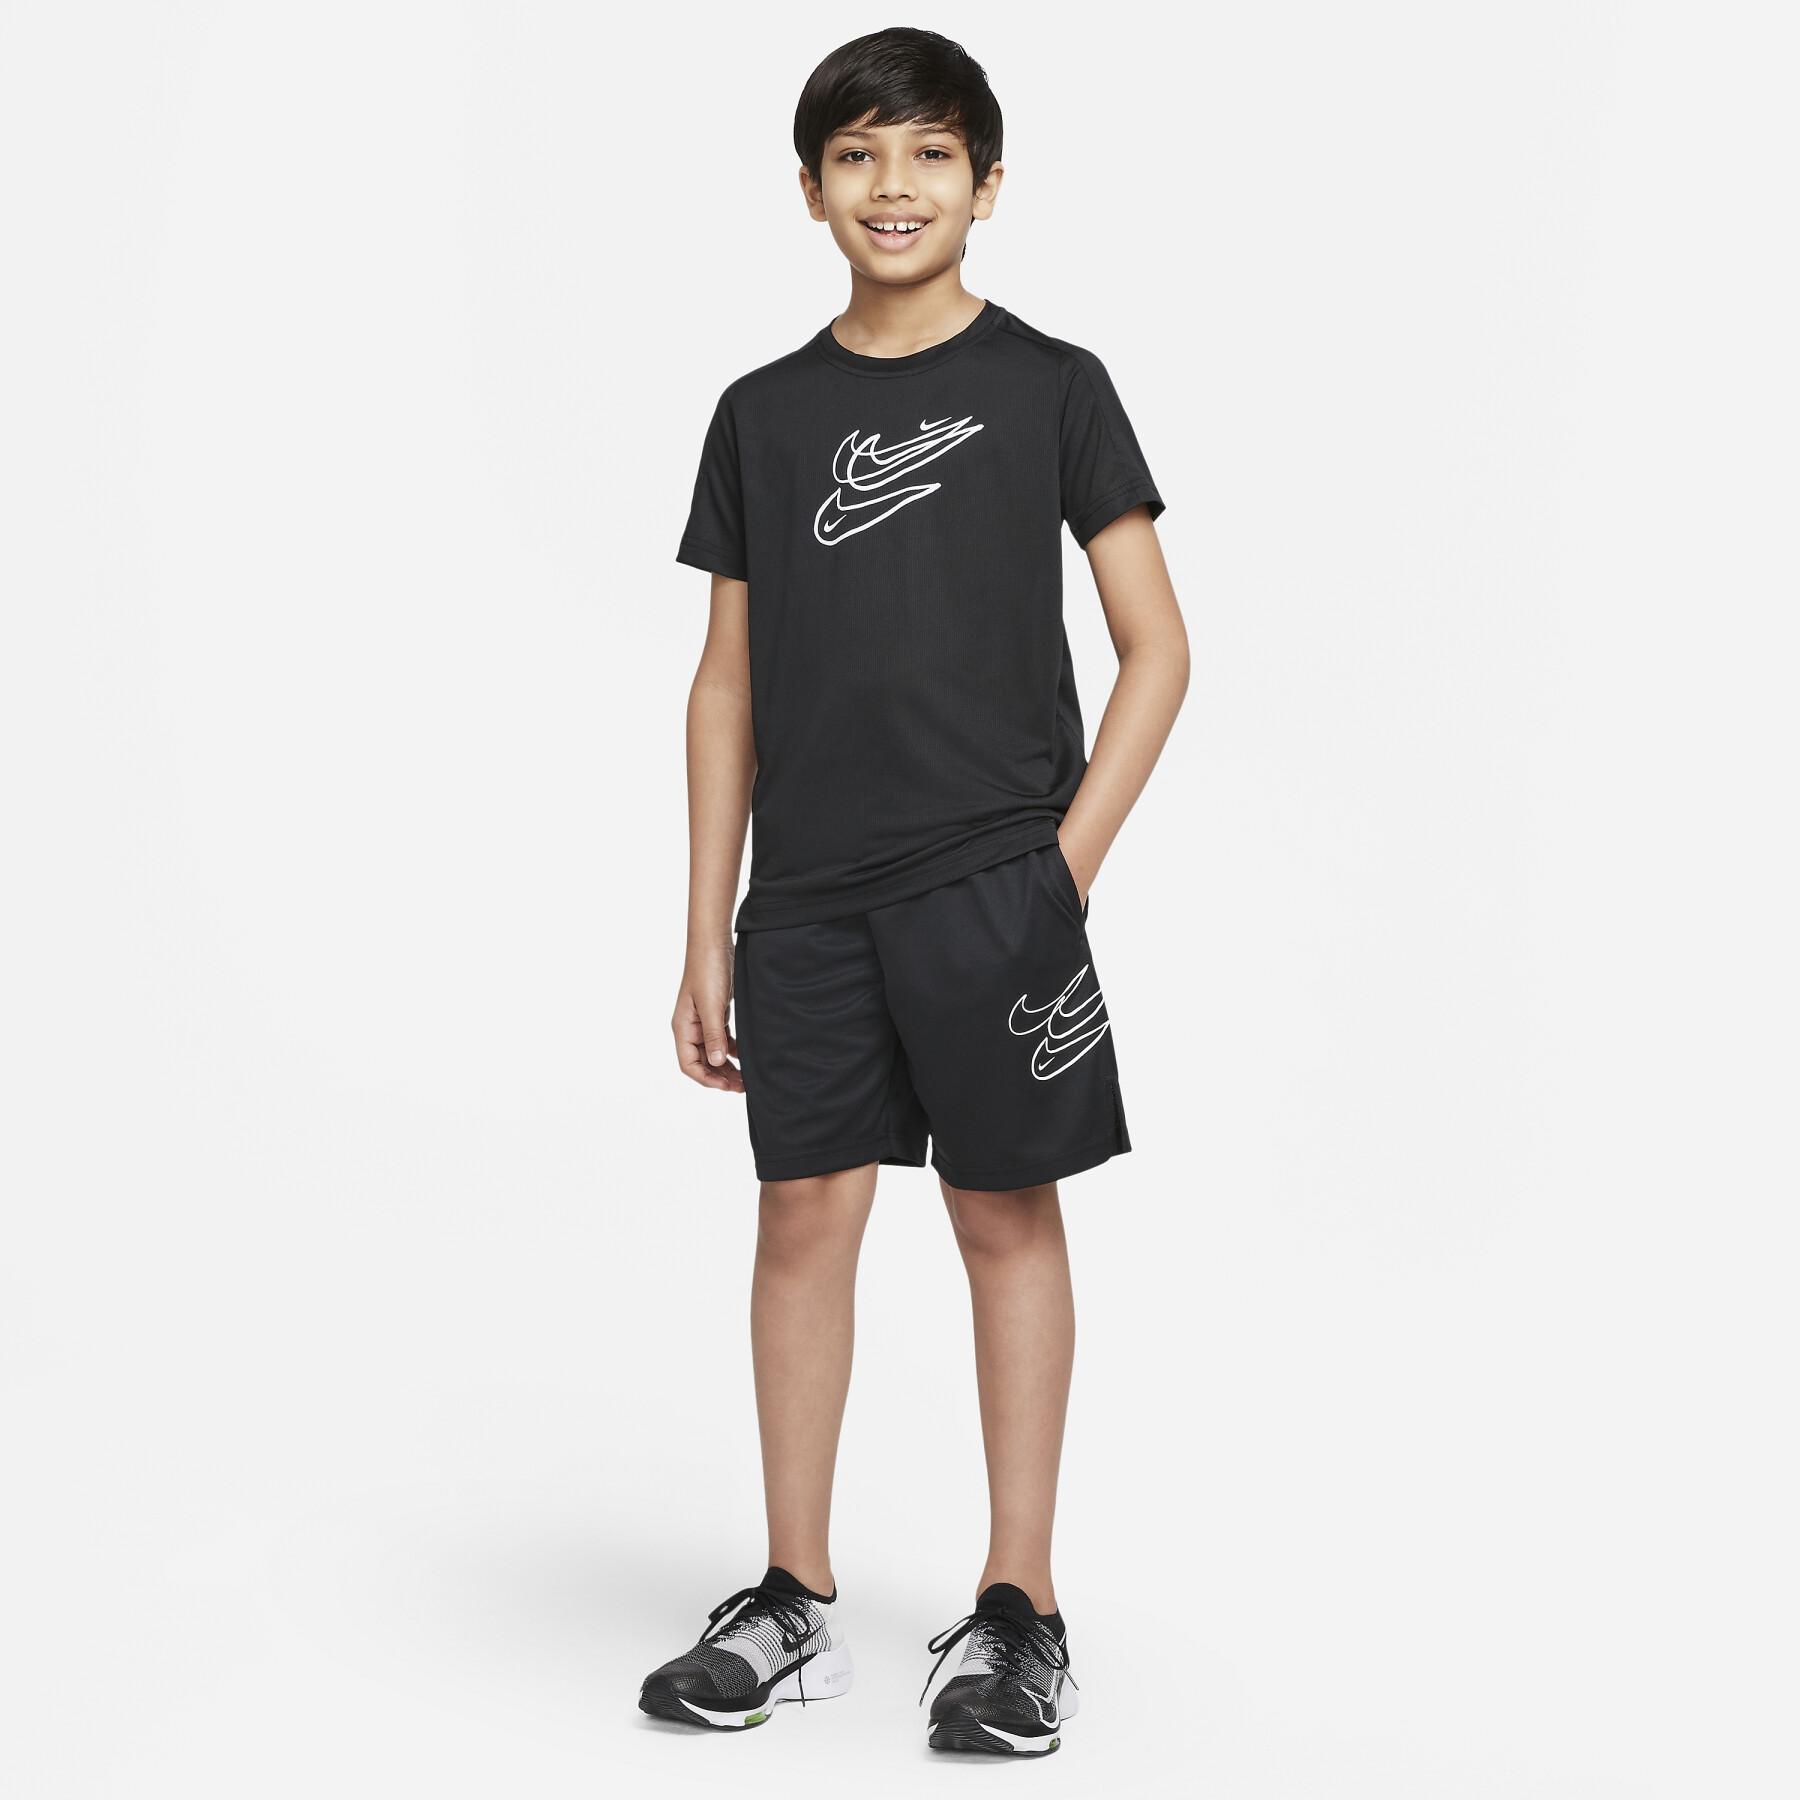 Children's shorts Nike Collection